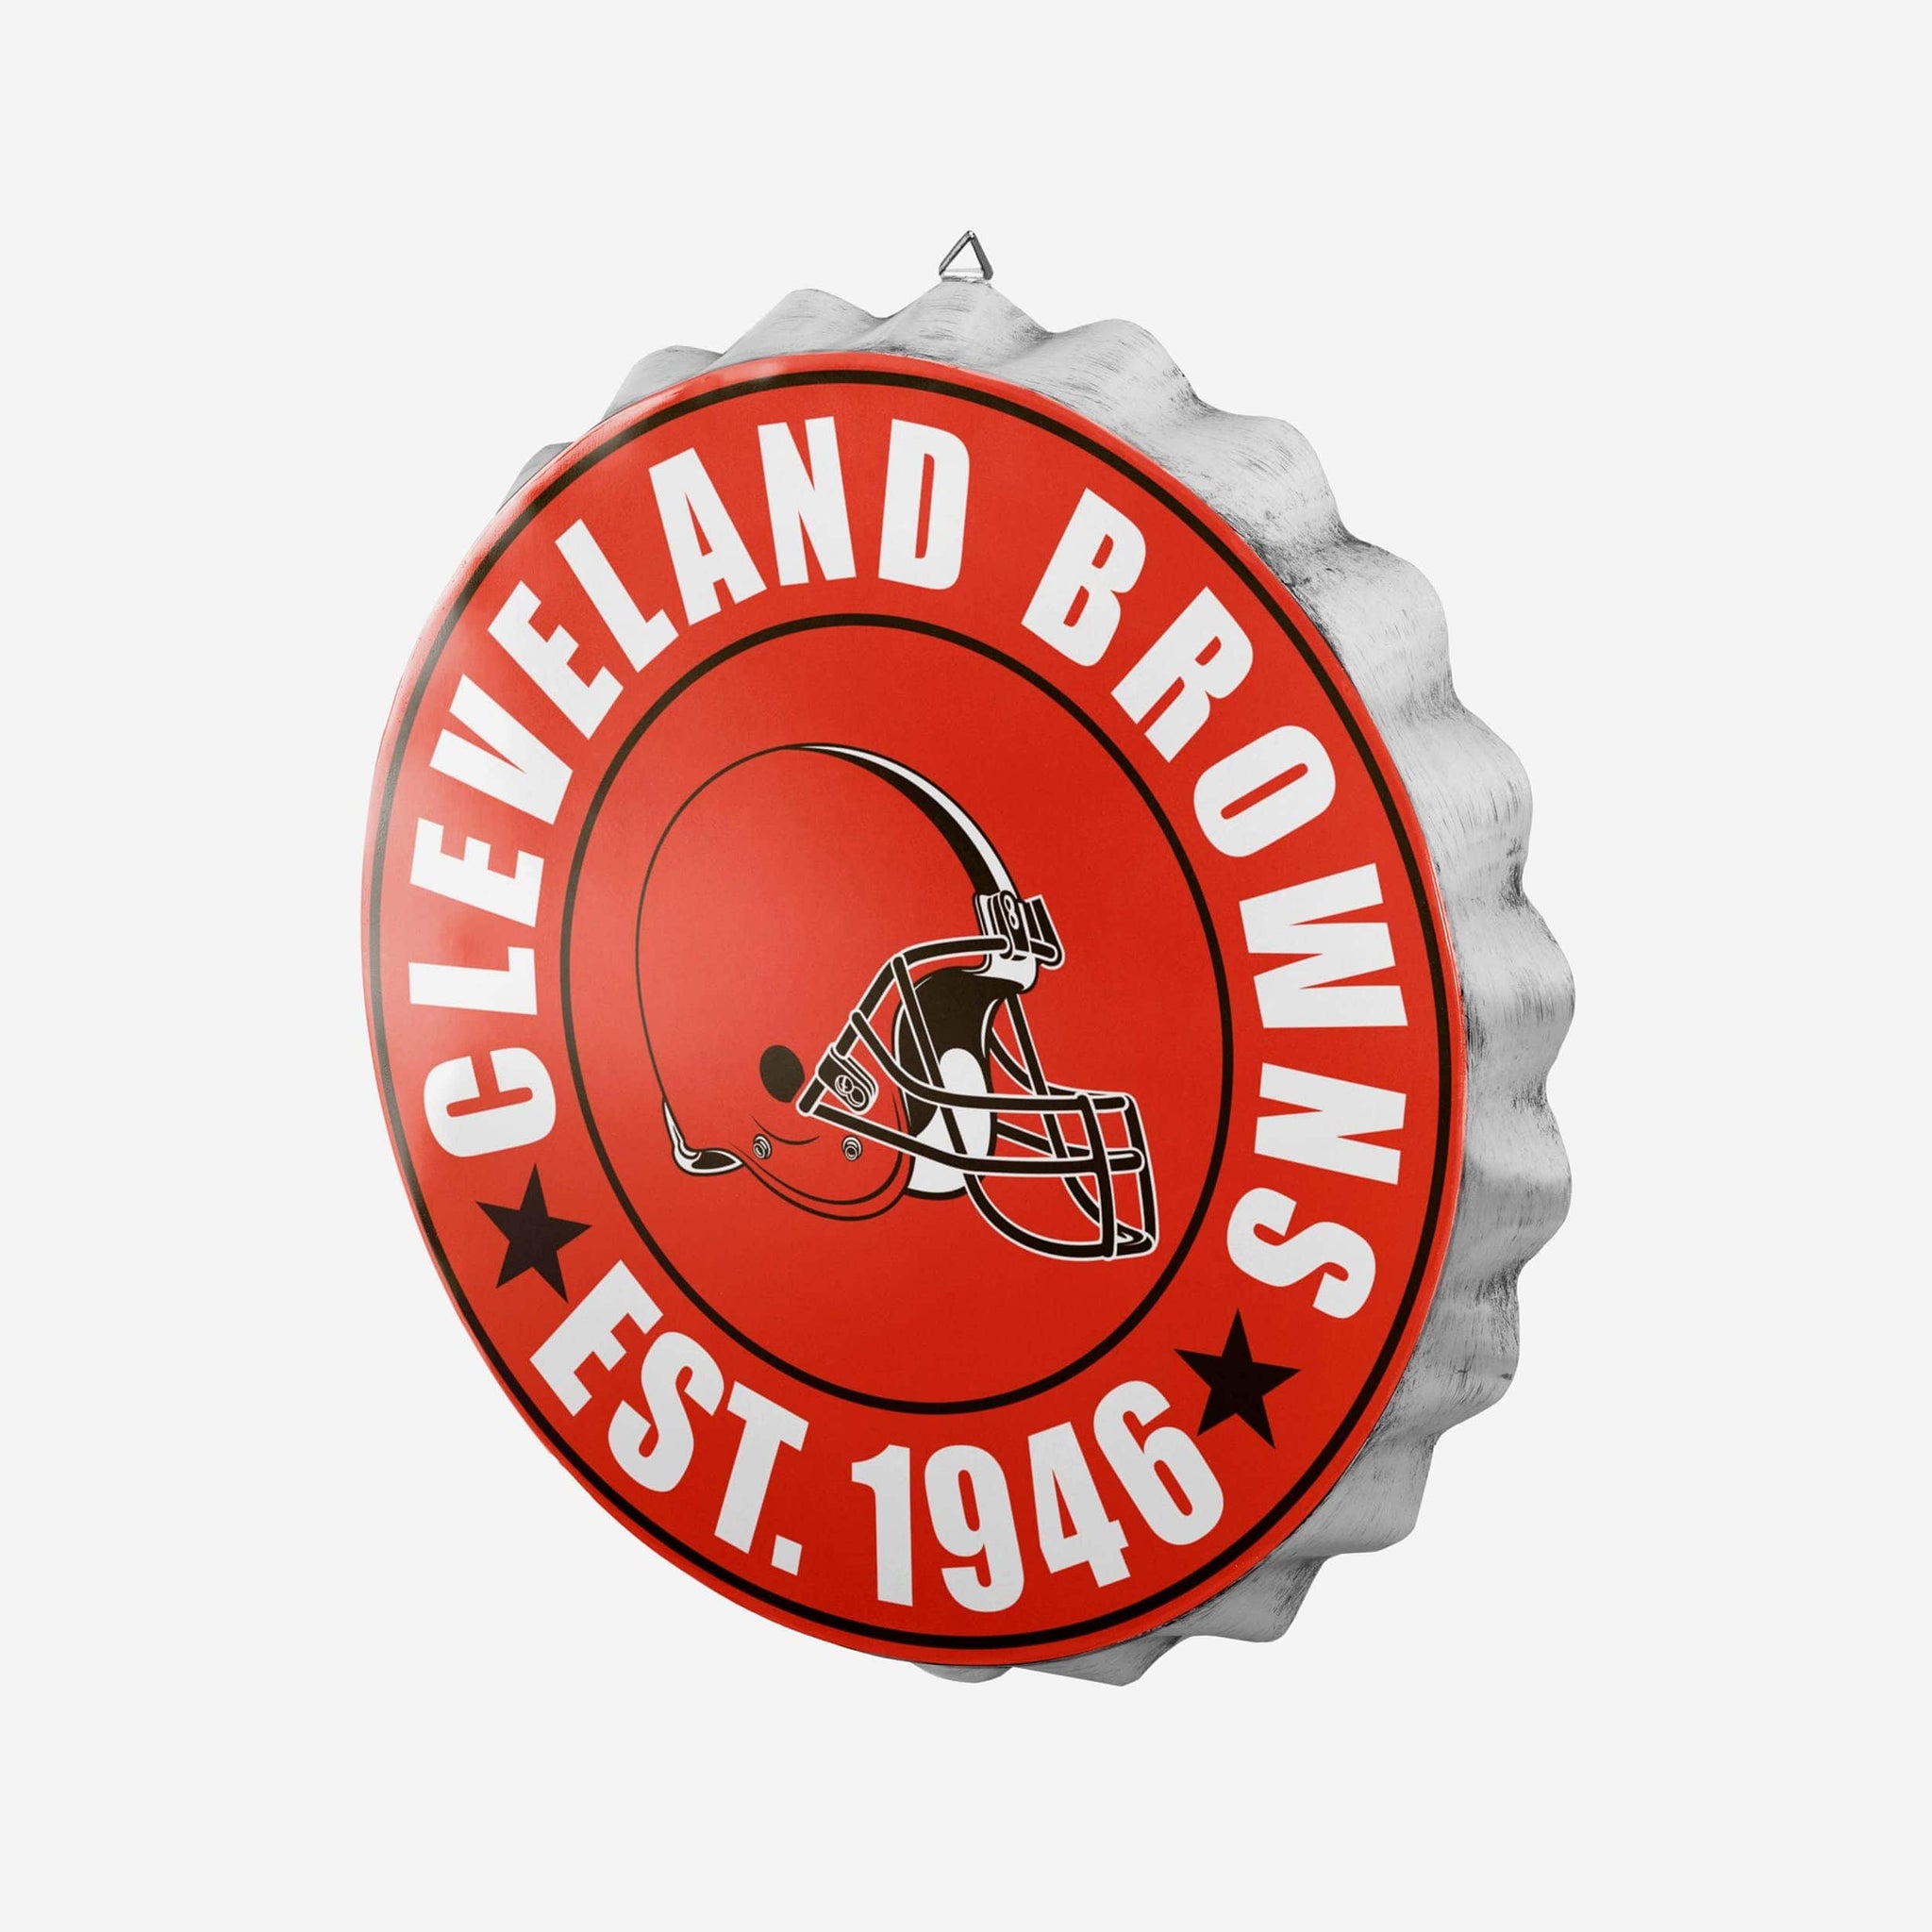 CLEVELAND BROWNS 75 Anniversary Water Bottle You get both bottles